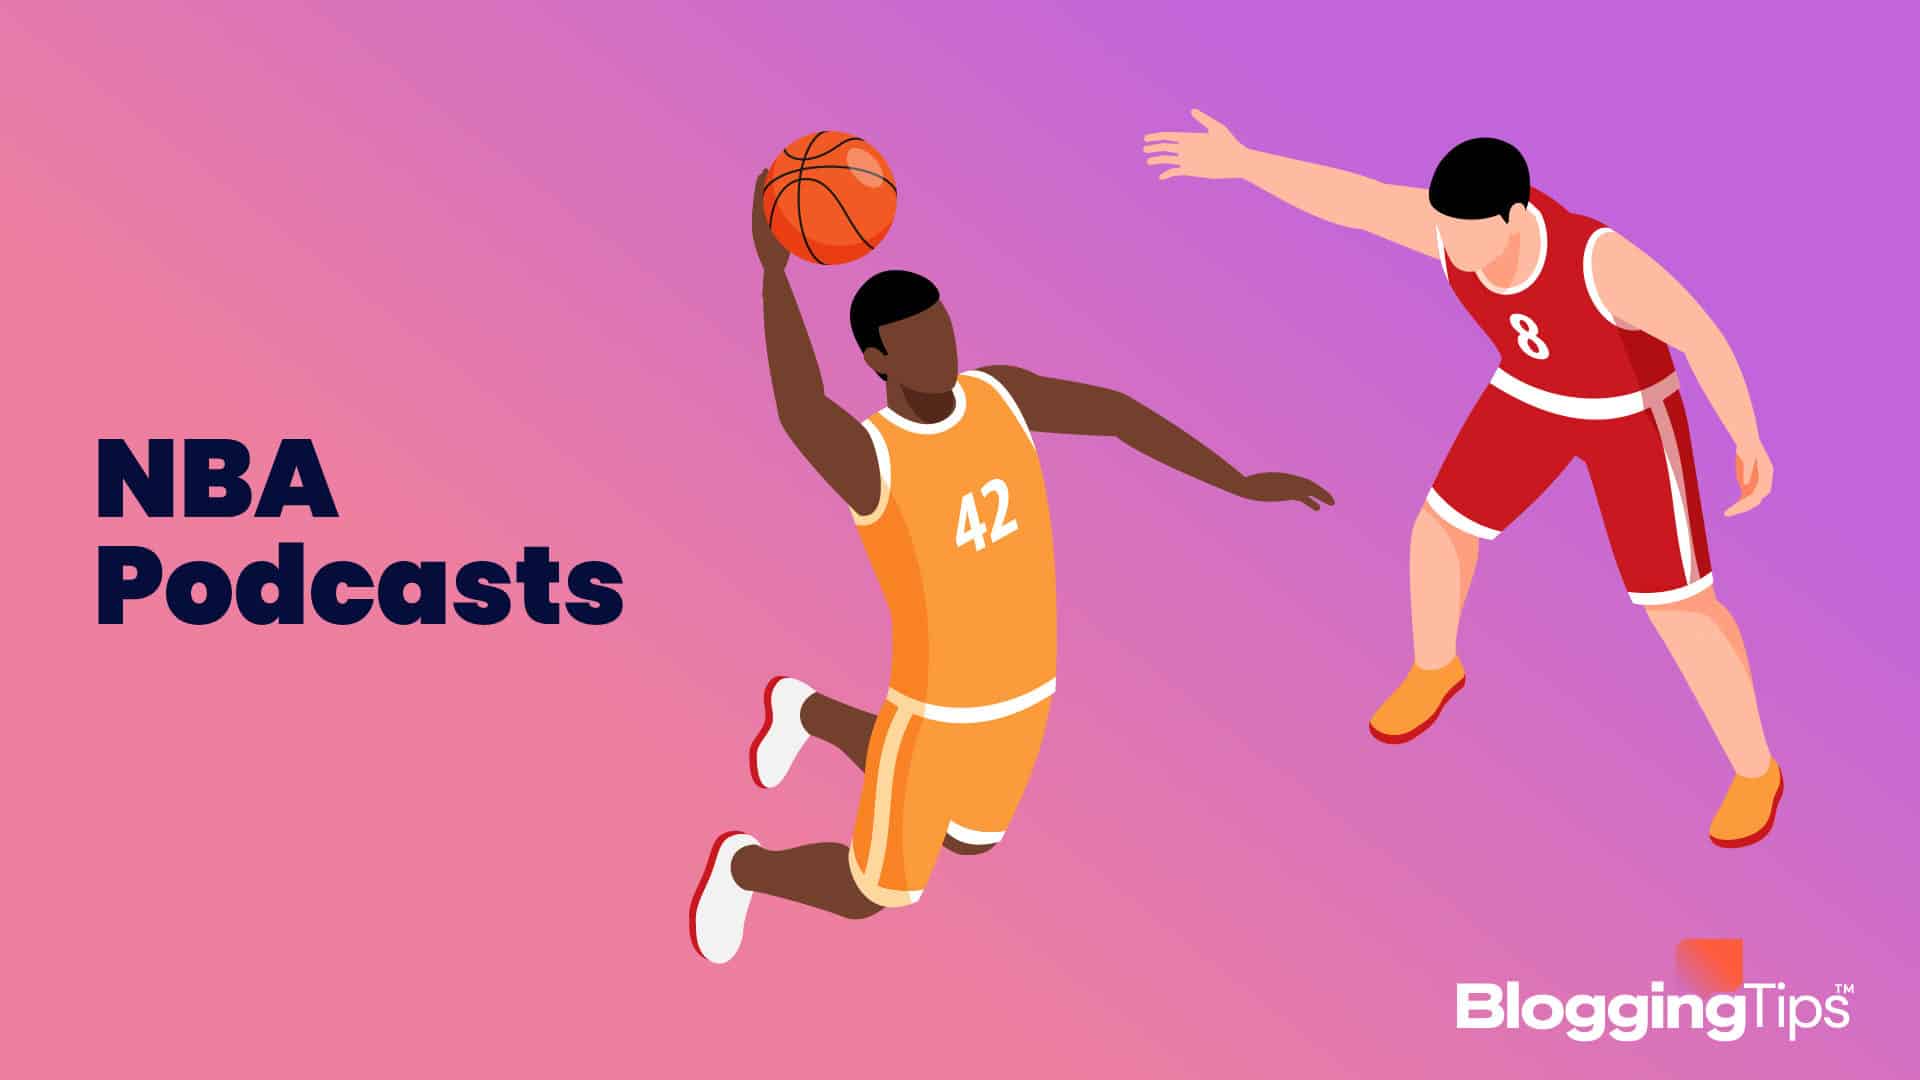 vector graphic showing an illustration of basketball with the big block text 